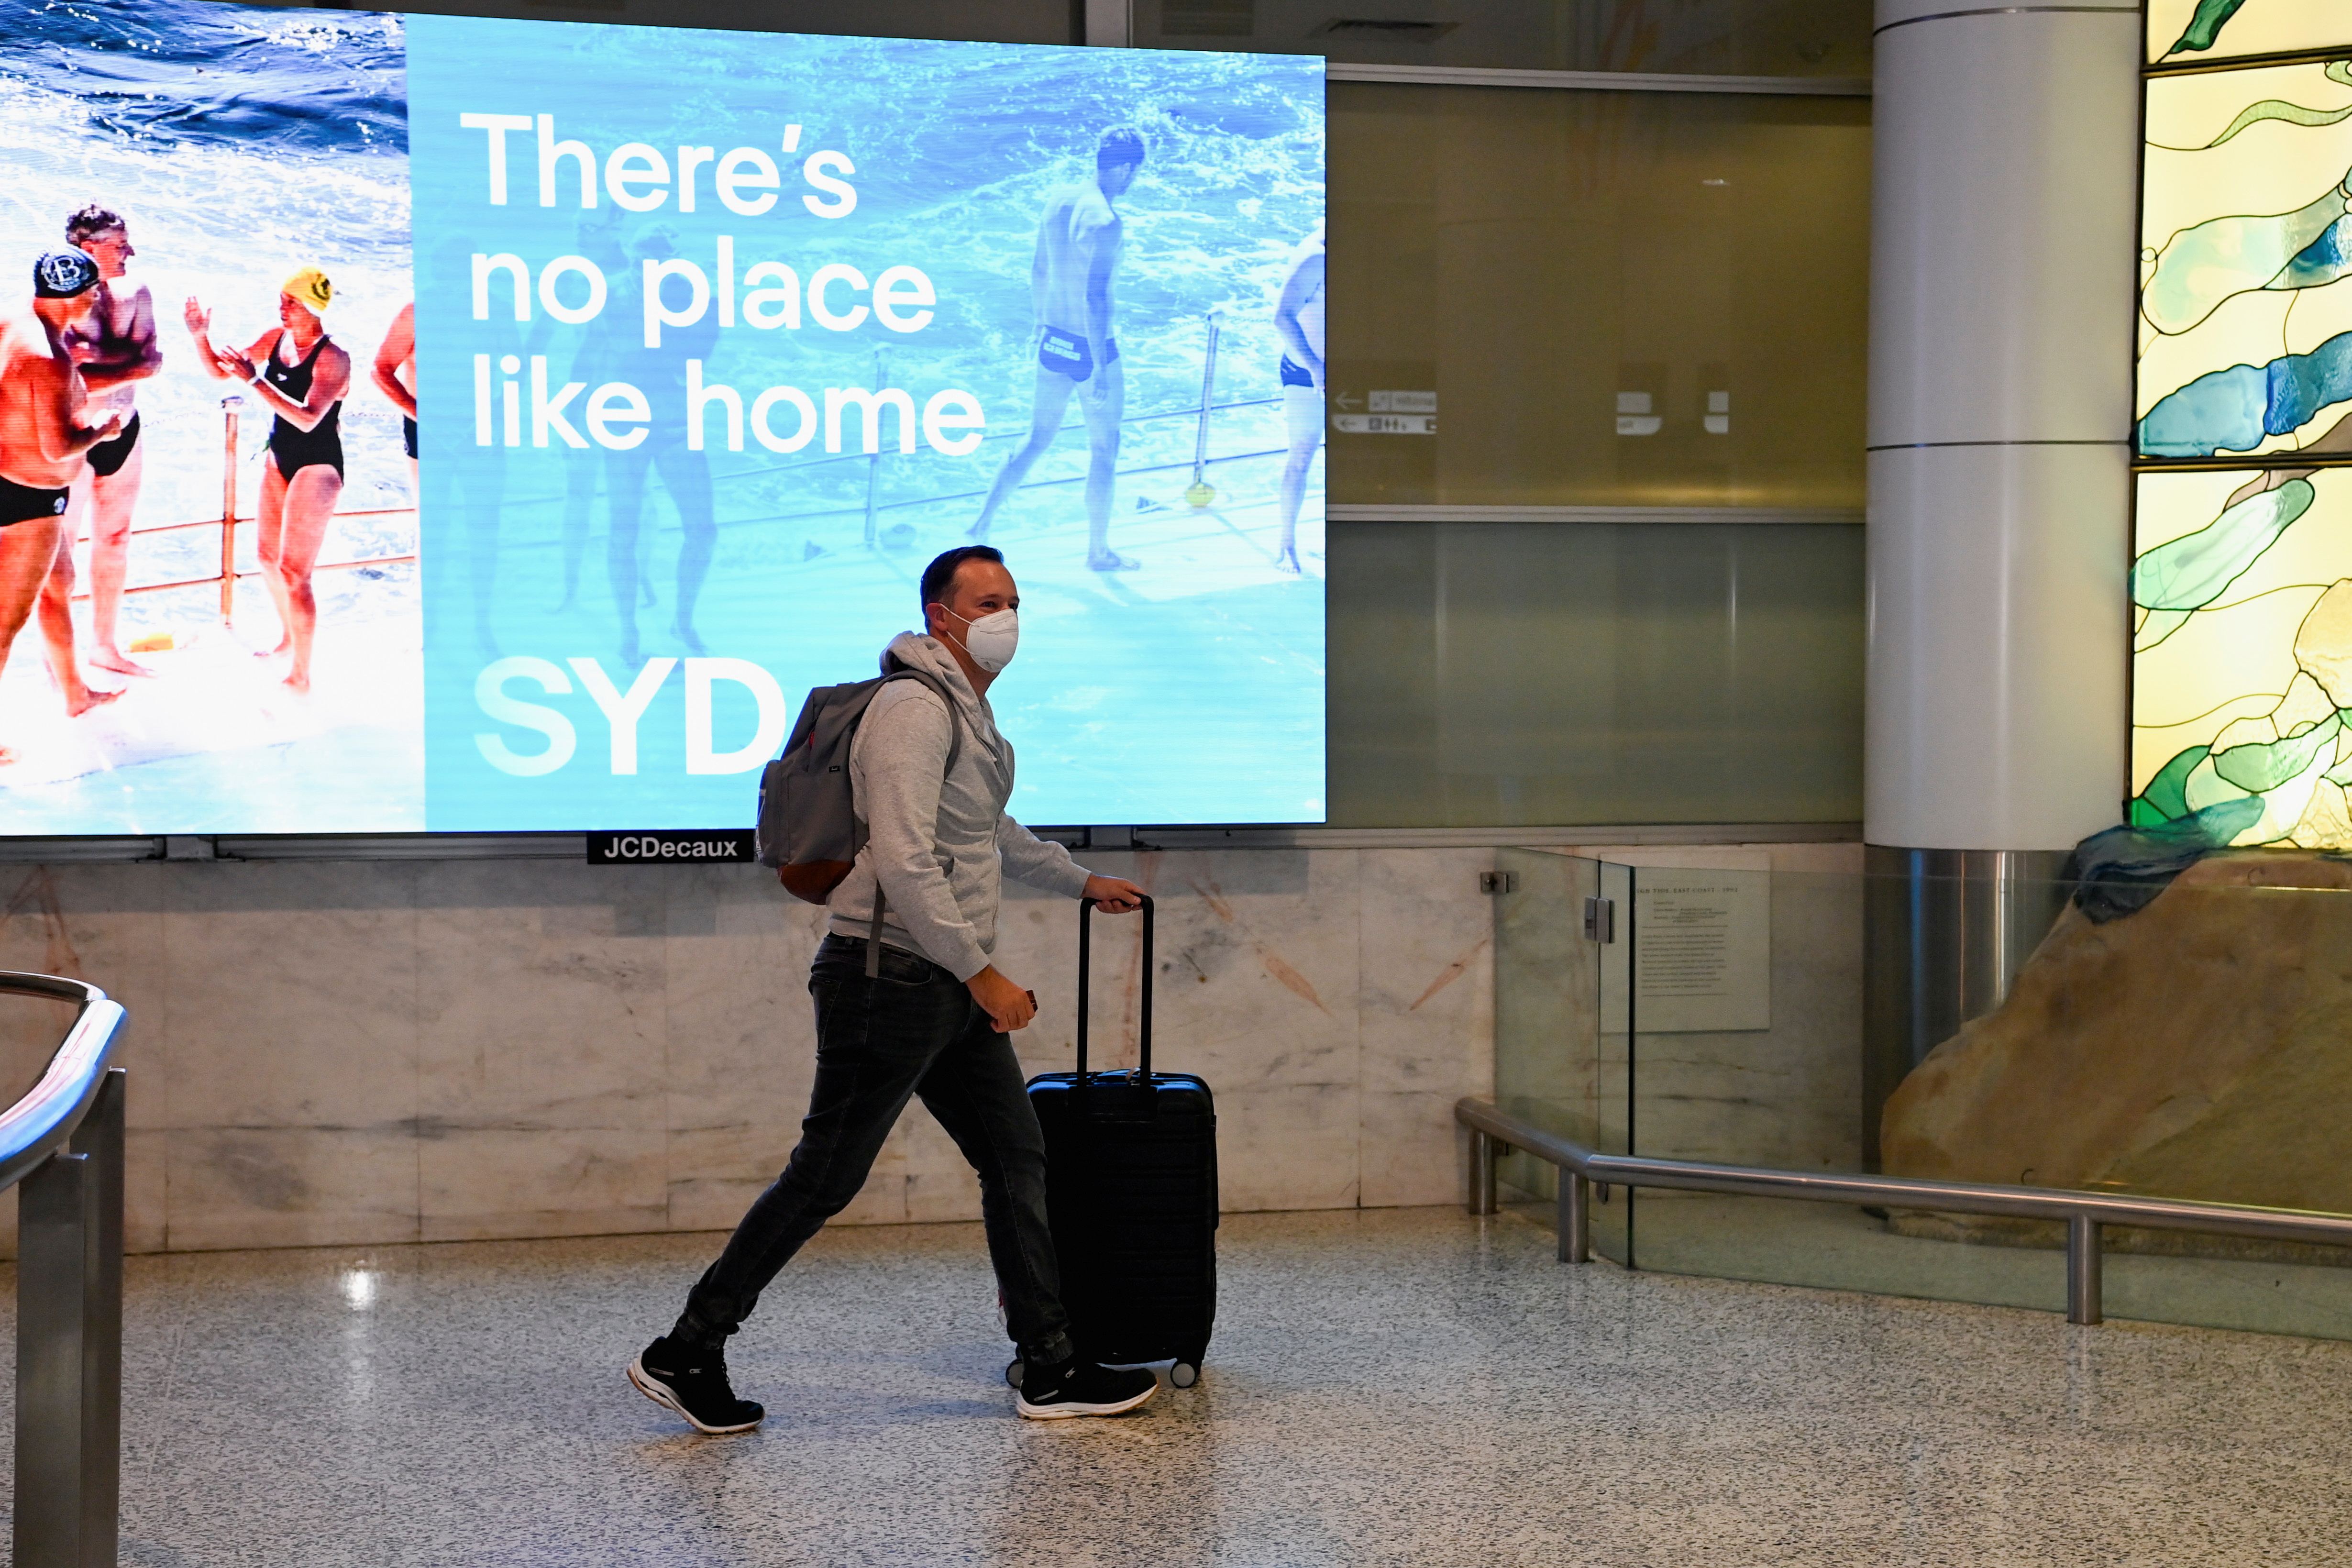 Sydney drops quarantine for Australian travellers for first time in pandemic